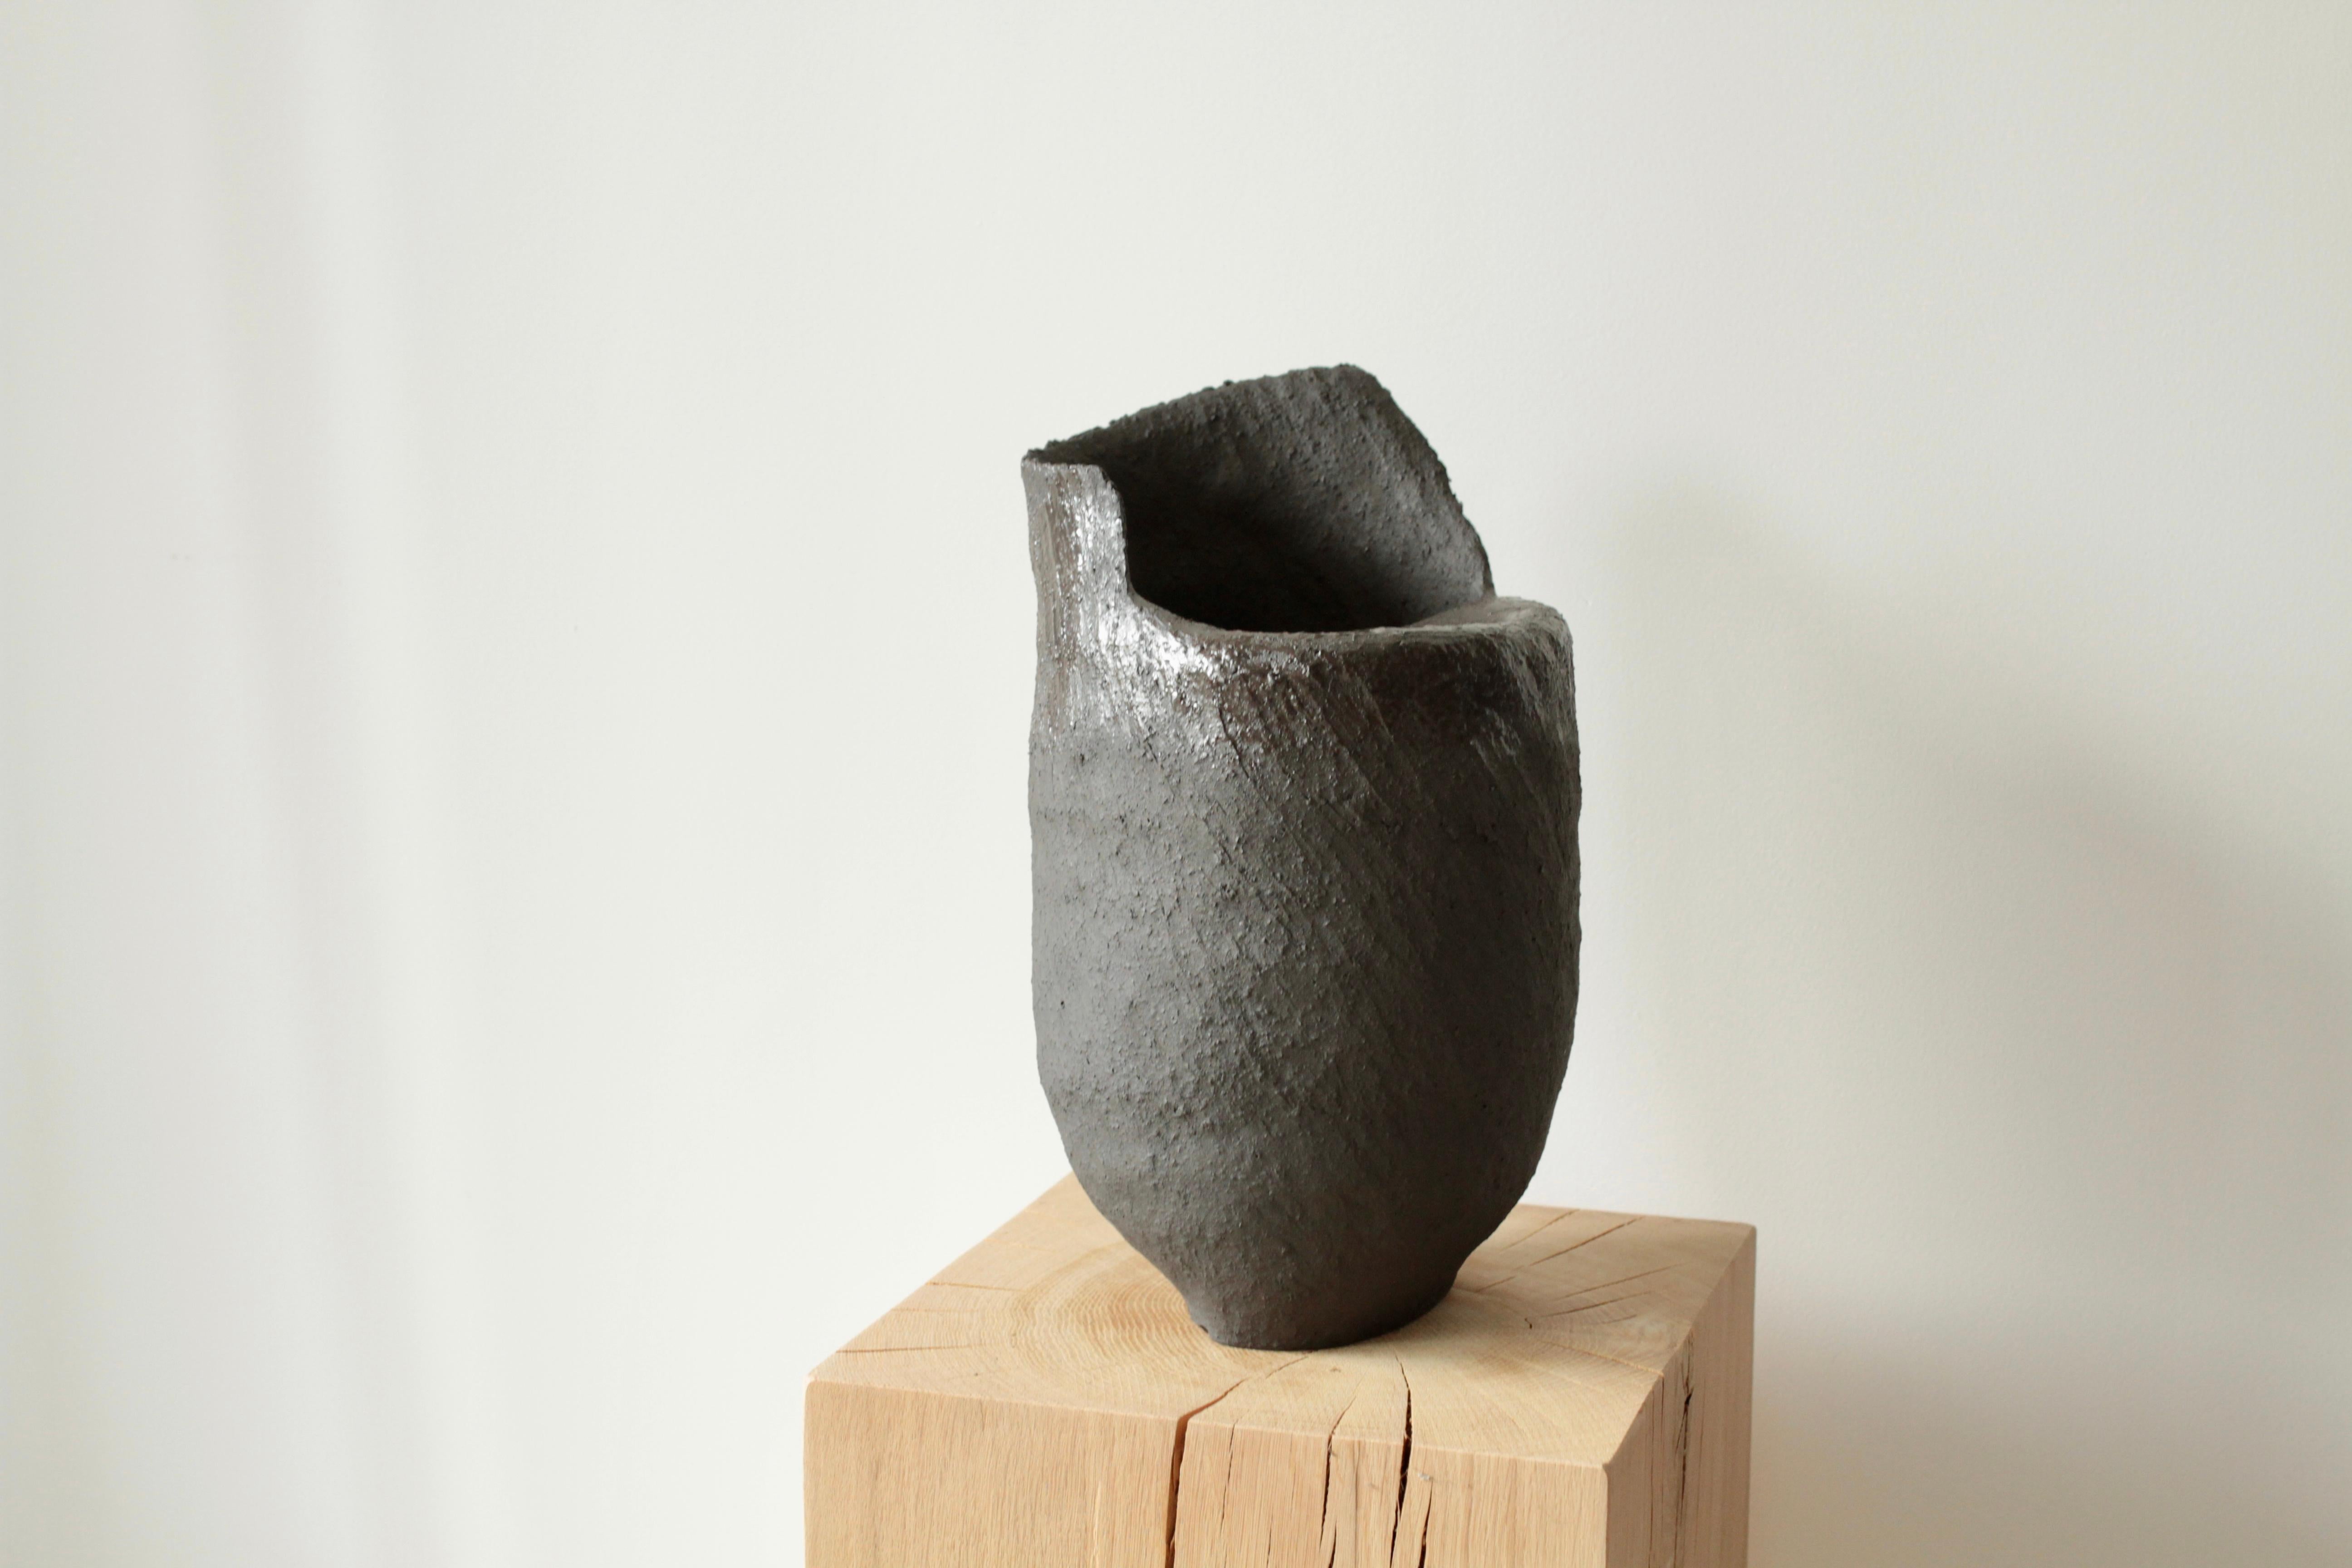 Stoneware Set of October's Vases 01 and 02 by Cécile Ducommun